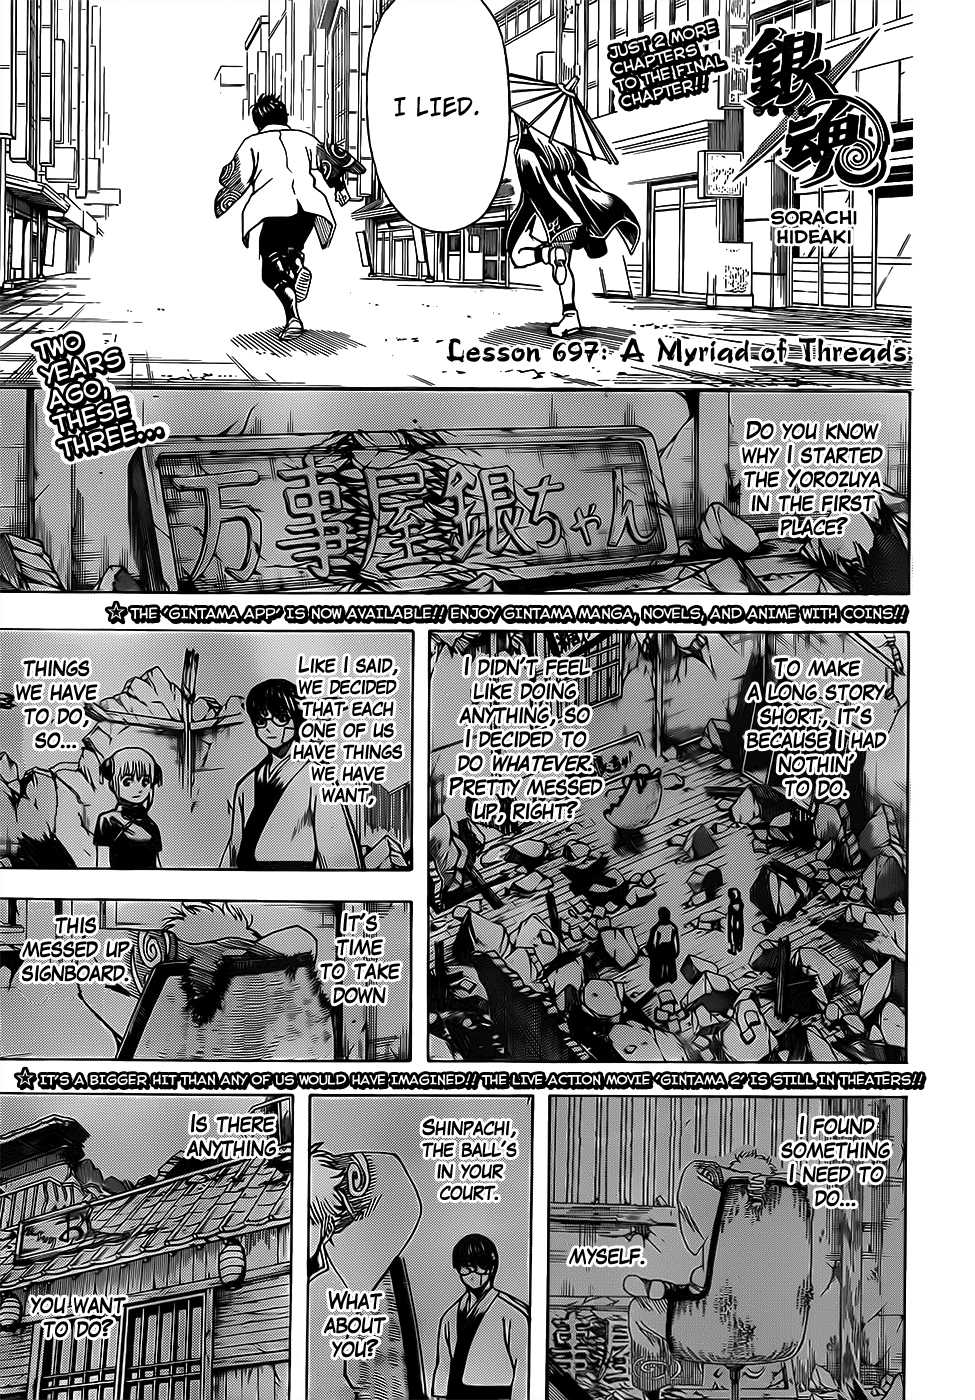 Gintama Chapter 697: A Myriad Of Threads - Picture 1